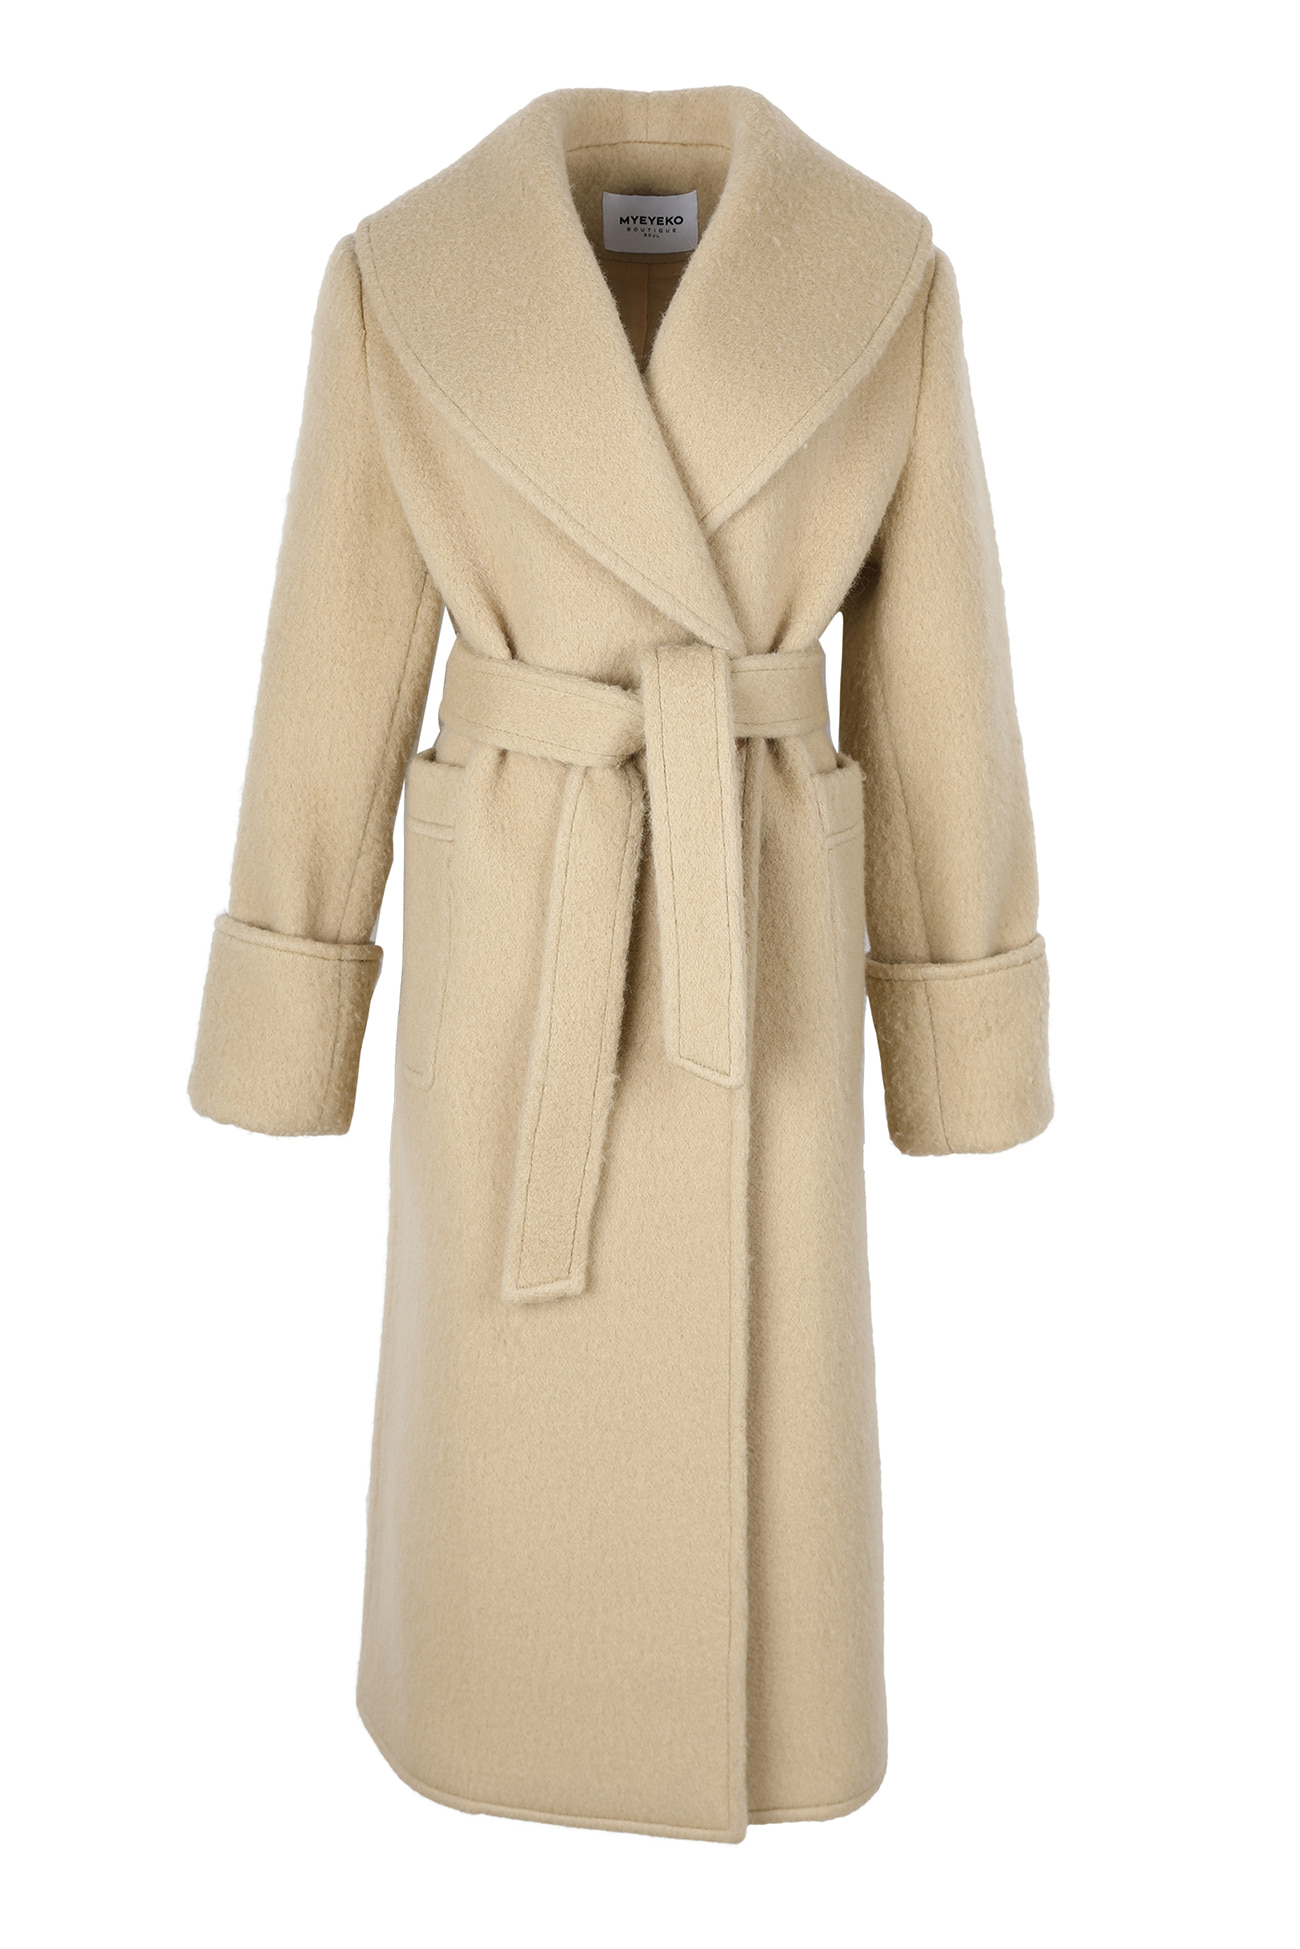 HIGH QUALITY LINE - Shawl Collar Boucle Coat (Butter Beige)